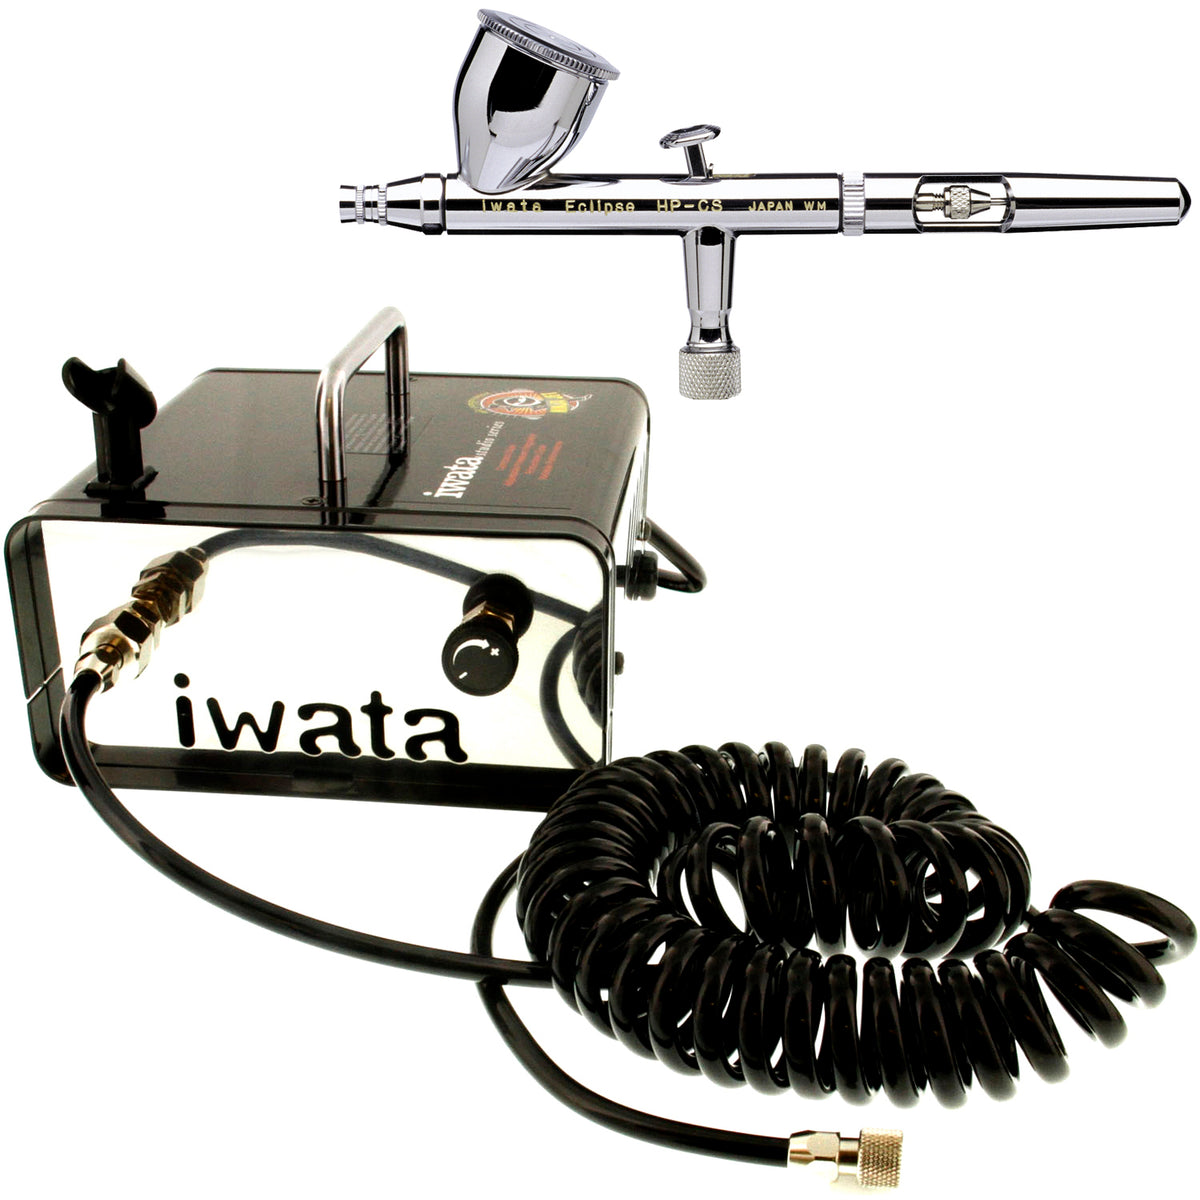  Iwata Eclipse HP-CS Airbrushing System with Smart Jet